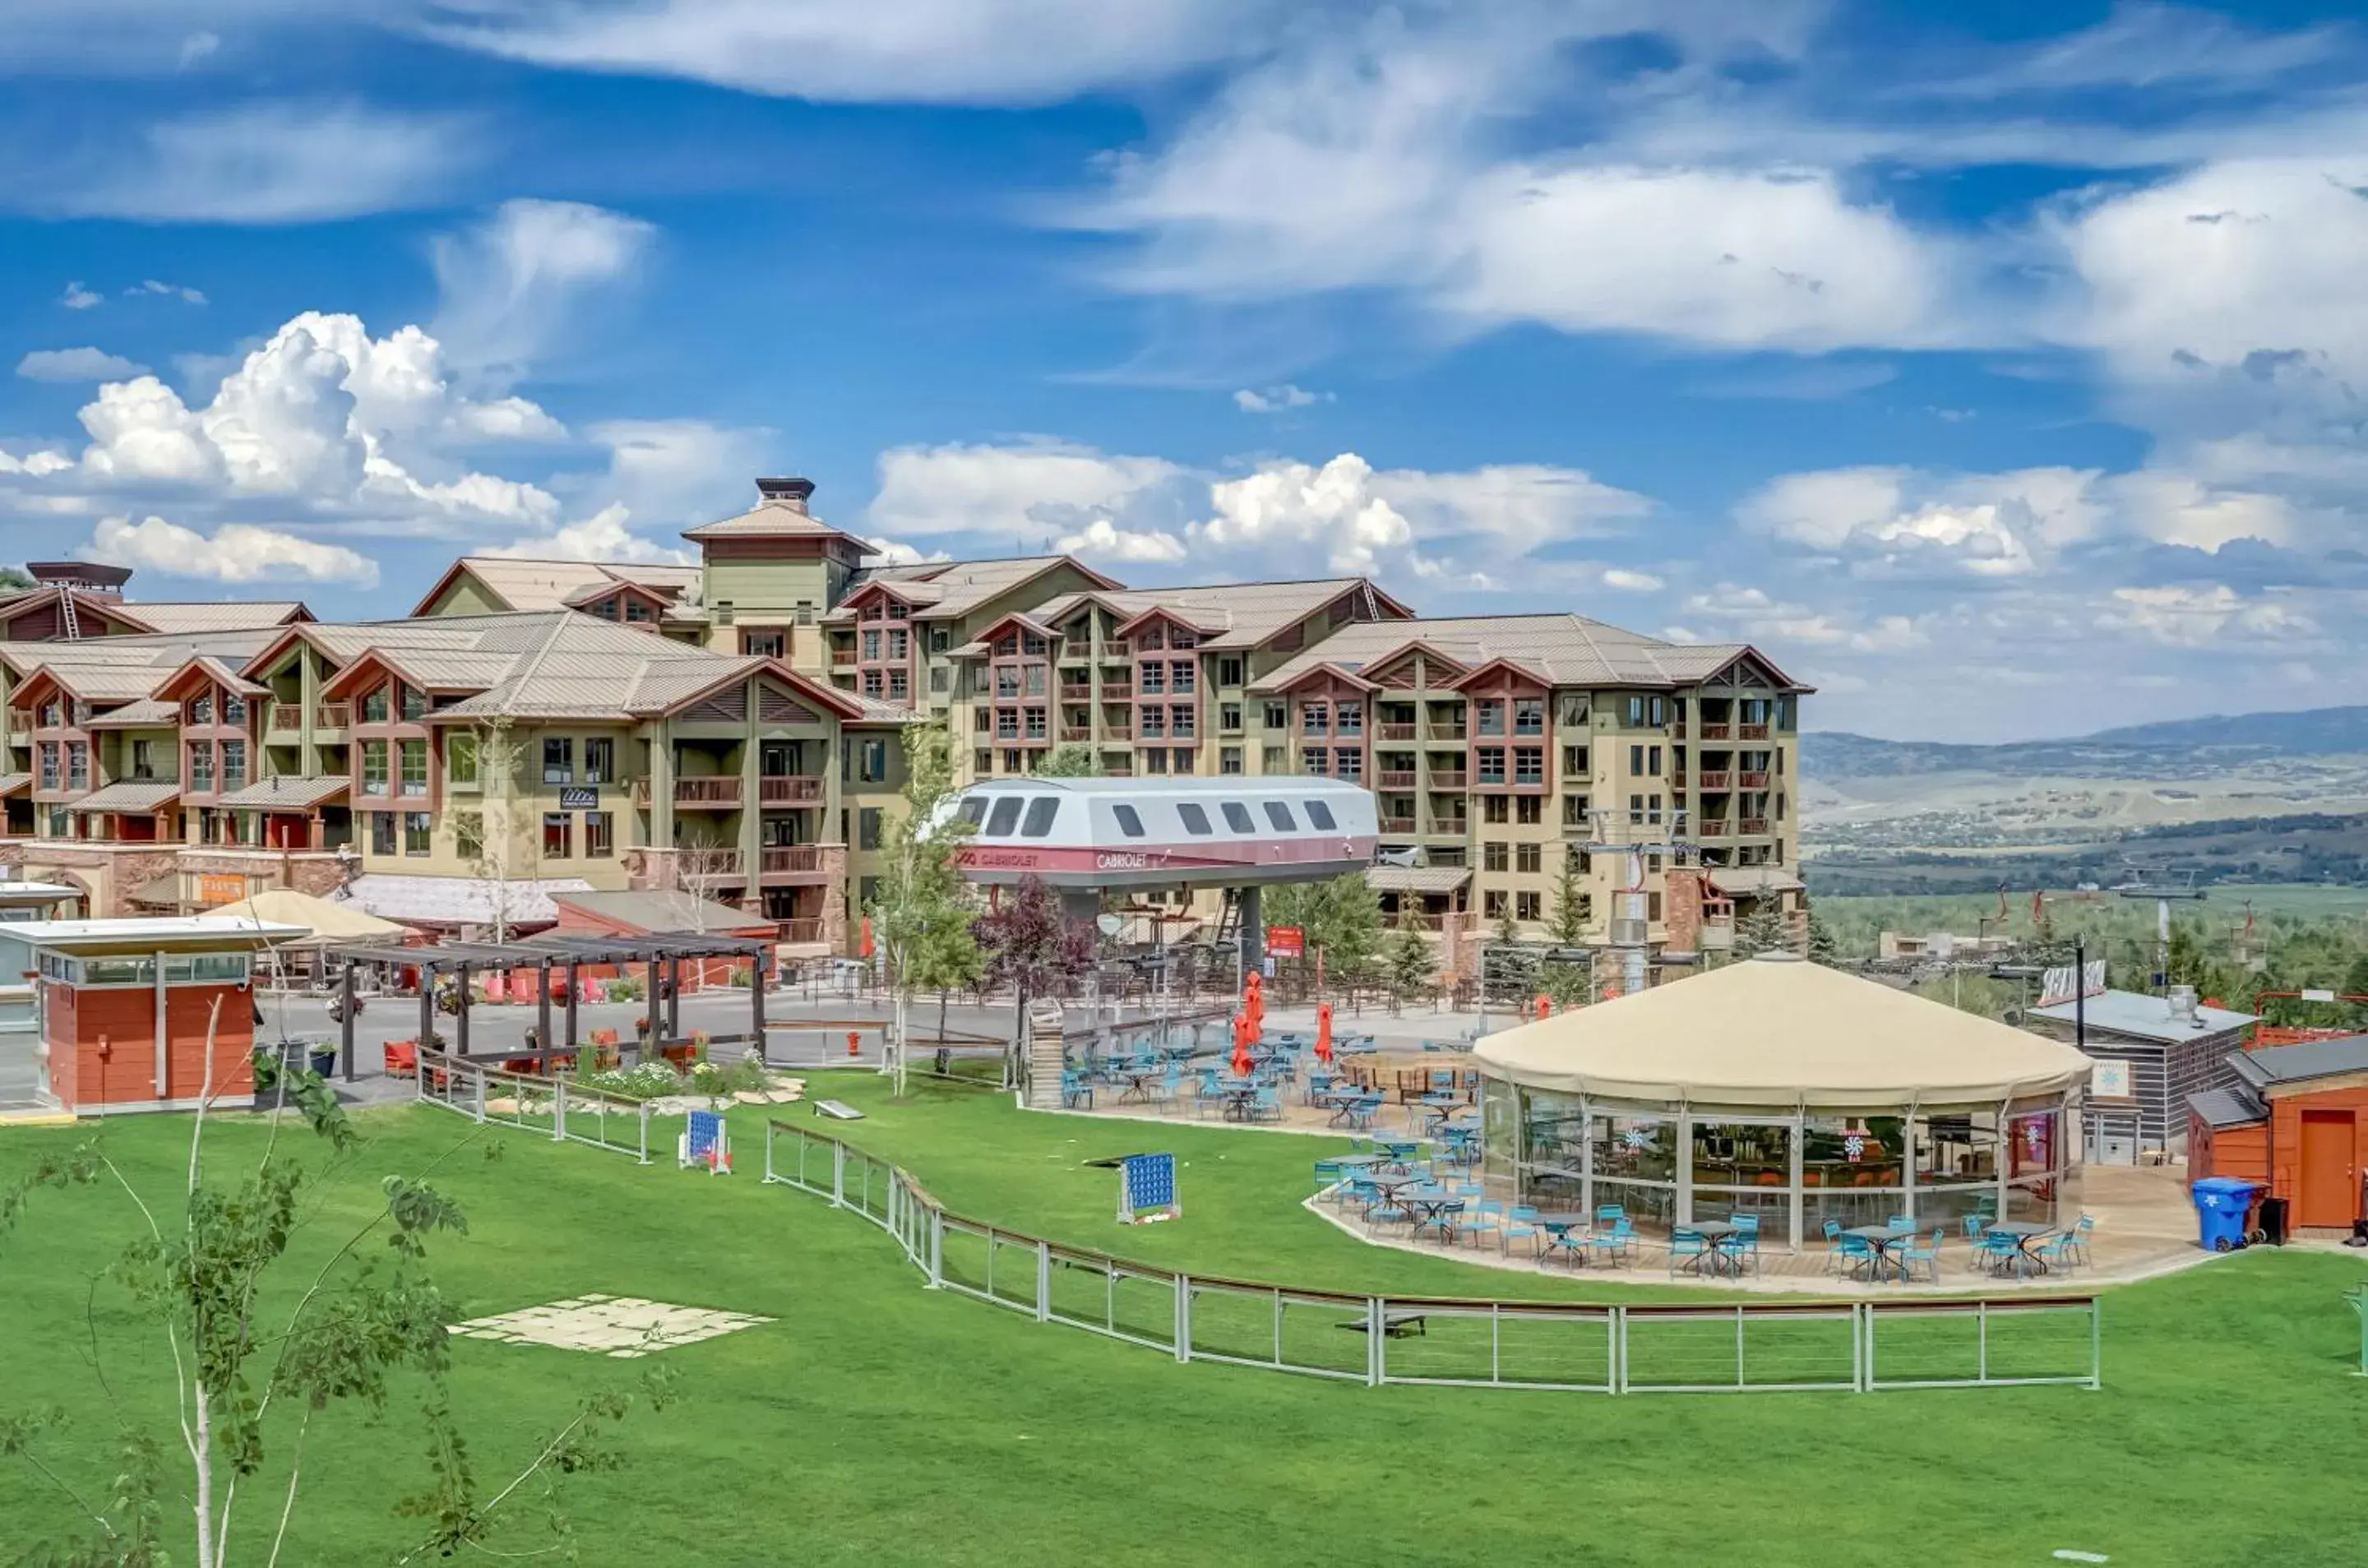 Entertainment, Property Building in Sundial Lodge by All Seasons Resort Lodging